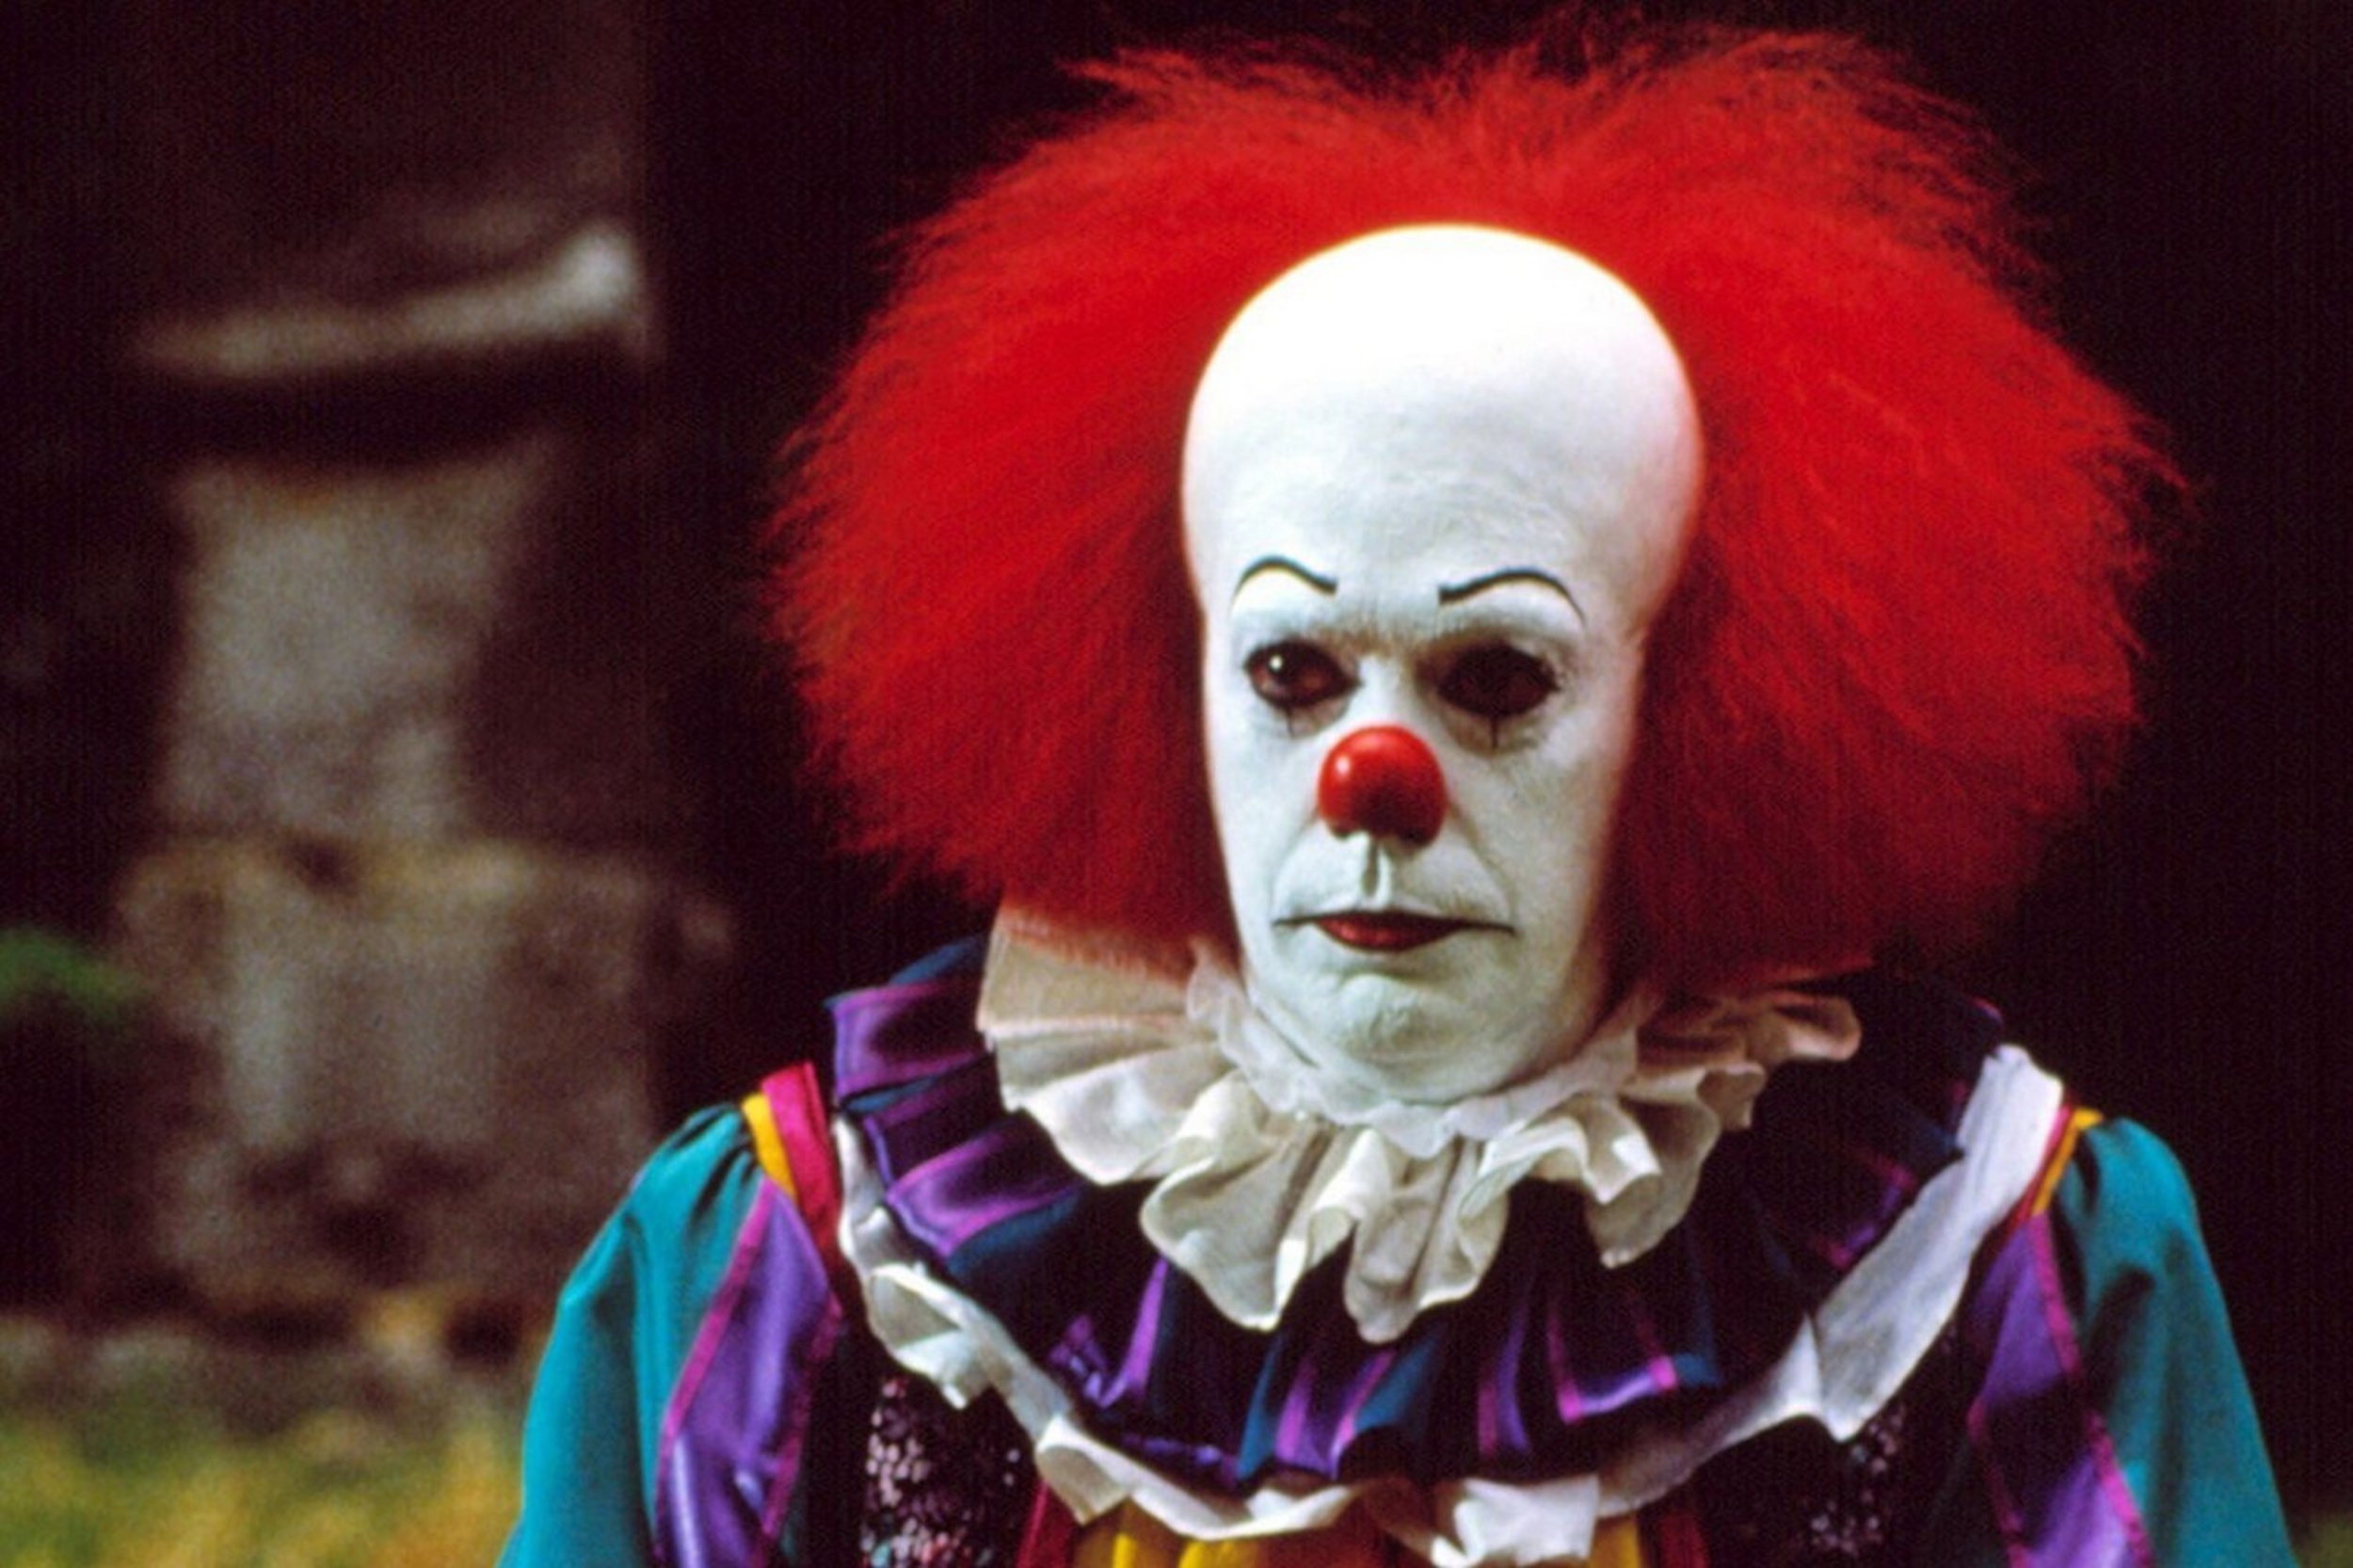 <p><em>It</em> is the gold standard of scary clown movies. The 1986 Stephen King novel of the same name was first adapted in 1990 as part of a television miniseries starring Tim Curry as the sinister Pennywise the Dancing Clown. Pennywise terrorized the youngsters of the fictional Derry, Maine, in the first part of the miniseries and returned in the second part, when the kids grew into adults played by Harry Anderson and John Ritter, among others. Although it initially aired as a miniseries, it is now generally viewed as a single 187-minute movie.</p><p><a href='https://www.msn.com/en-us/community/channel/vid-cj9pqbr0vn9in2b6ddcd8sfgpfq6x6utp44fssrv6mc2gtybw0us'>Follow us on MSN to see more of our exclusive entertainment content.</a></p>